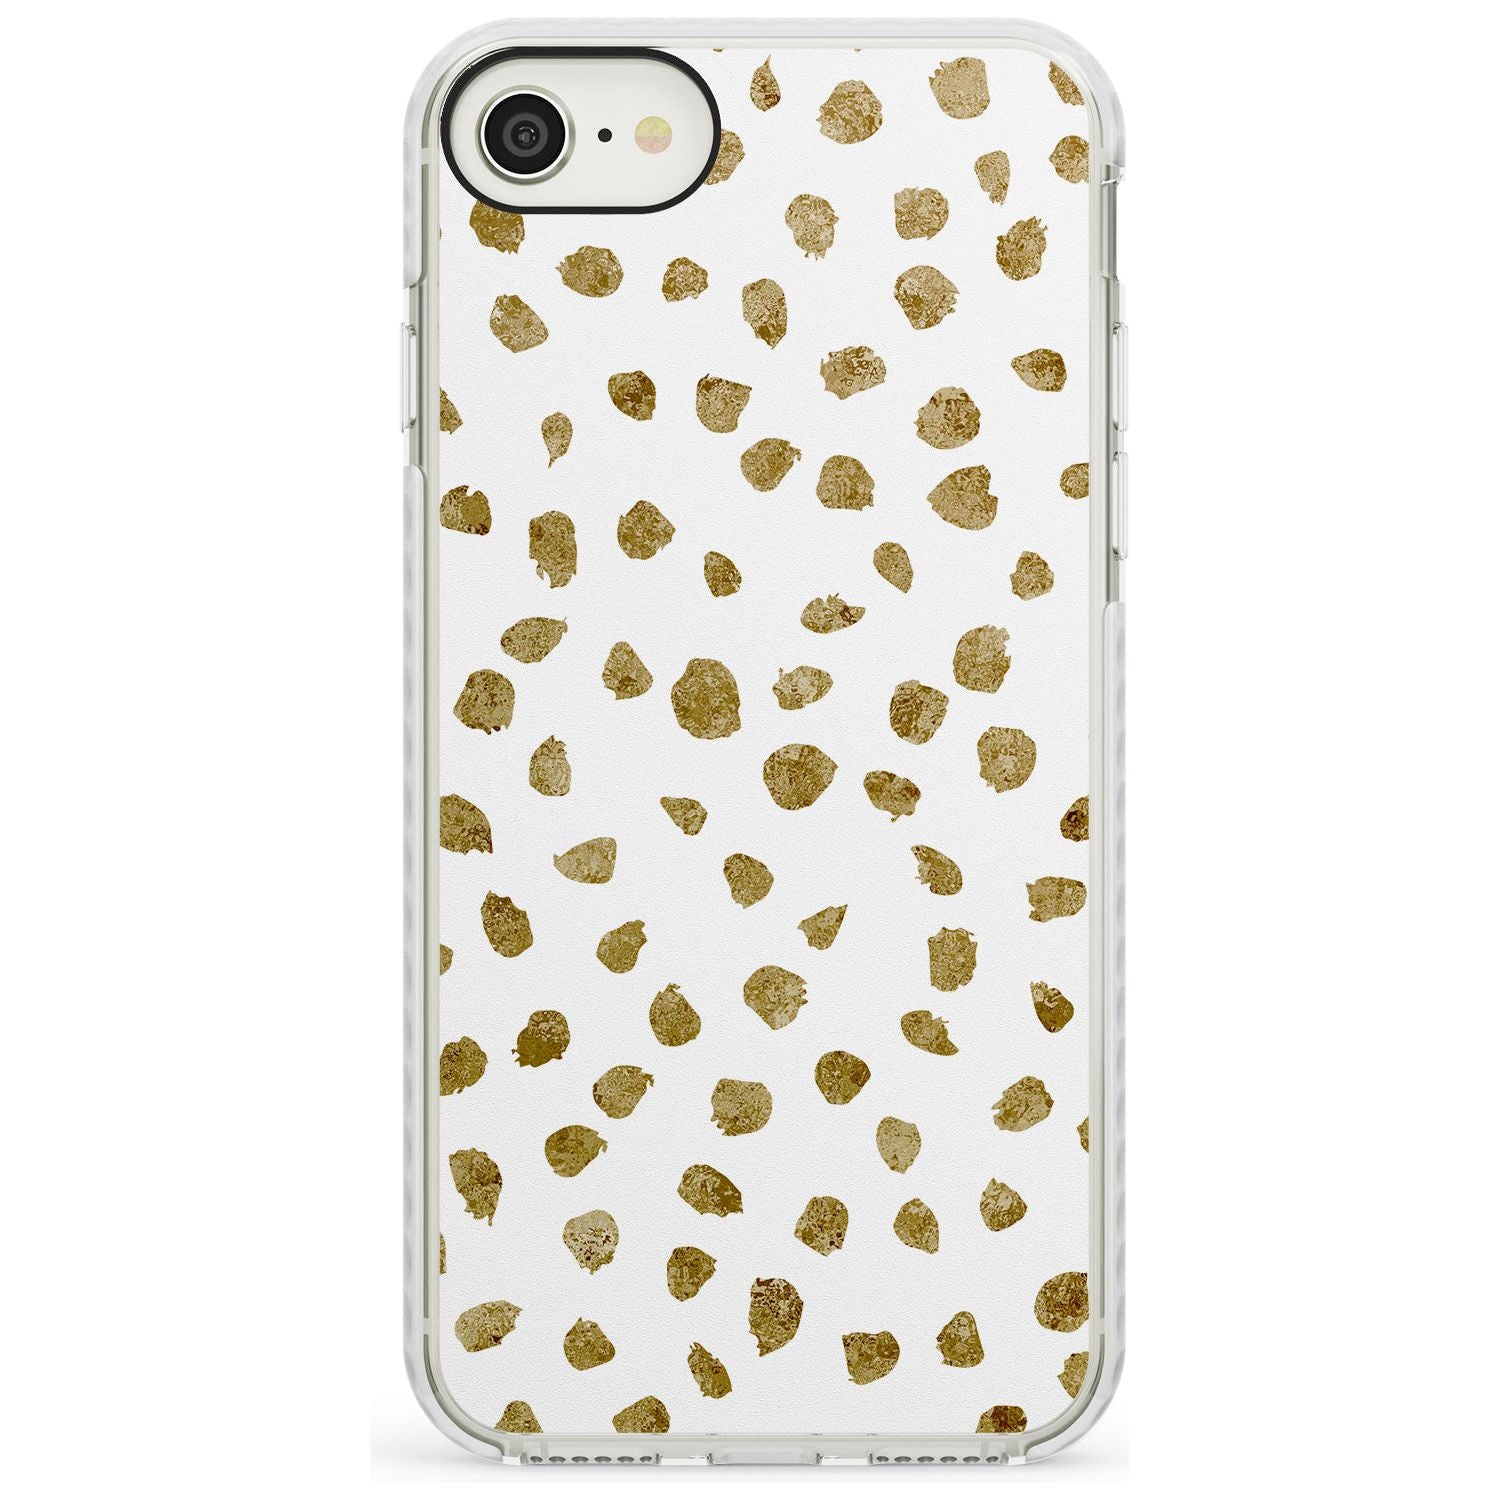 Gold Look on White Dalmatian Polka Dot Spots Impact Phone Case for iPhone SE 8 7 Plus